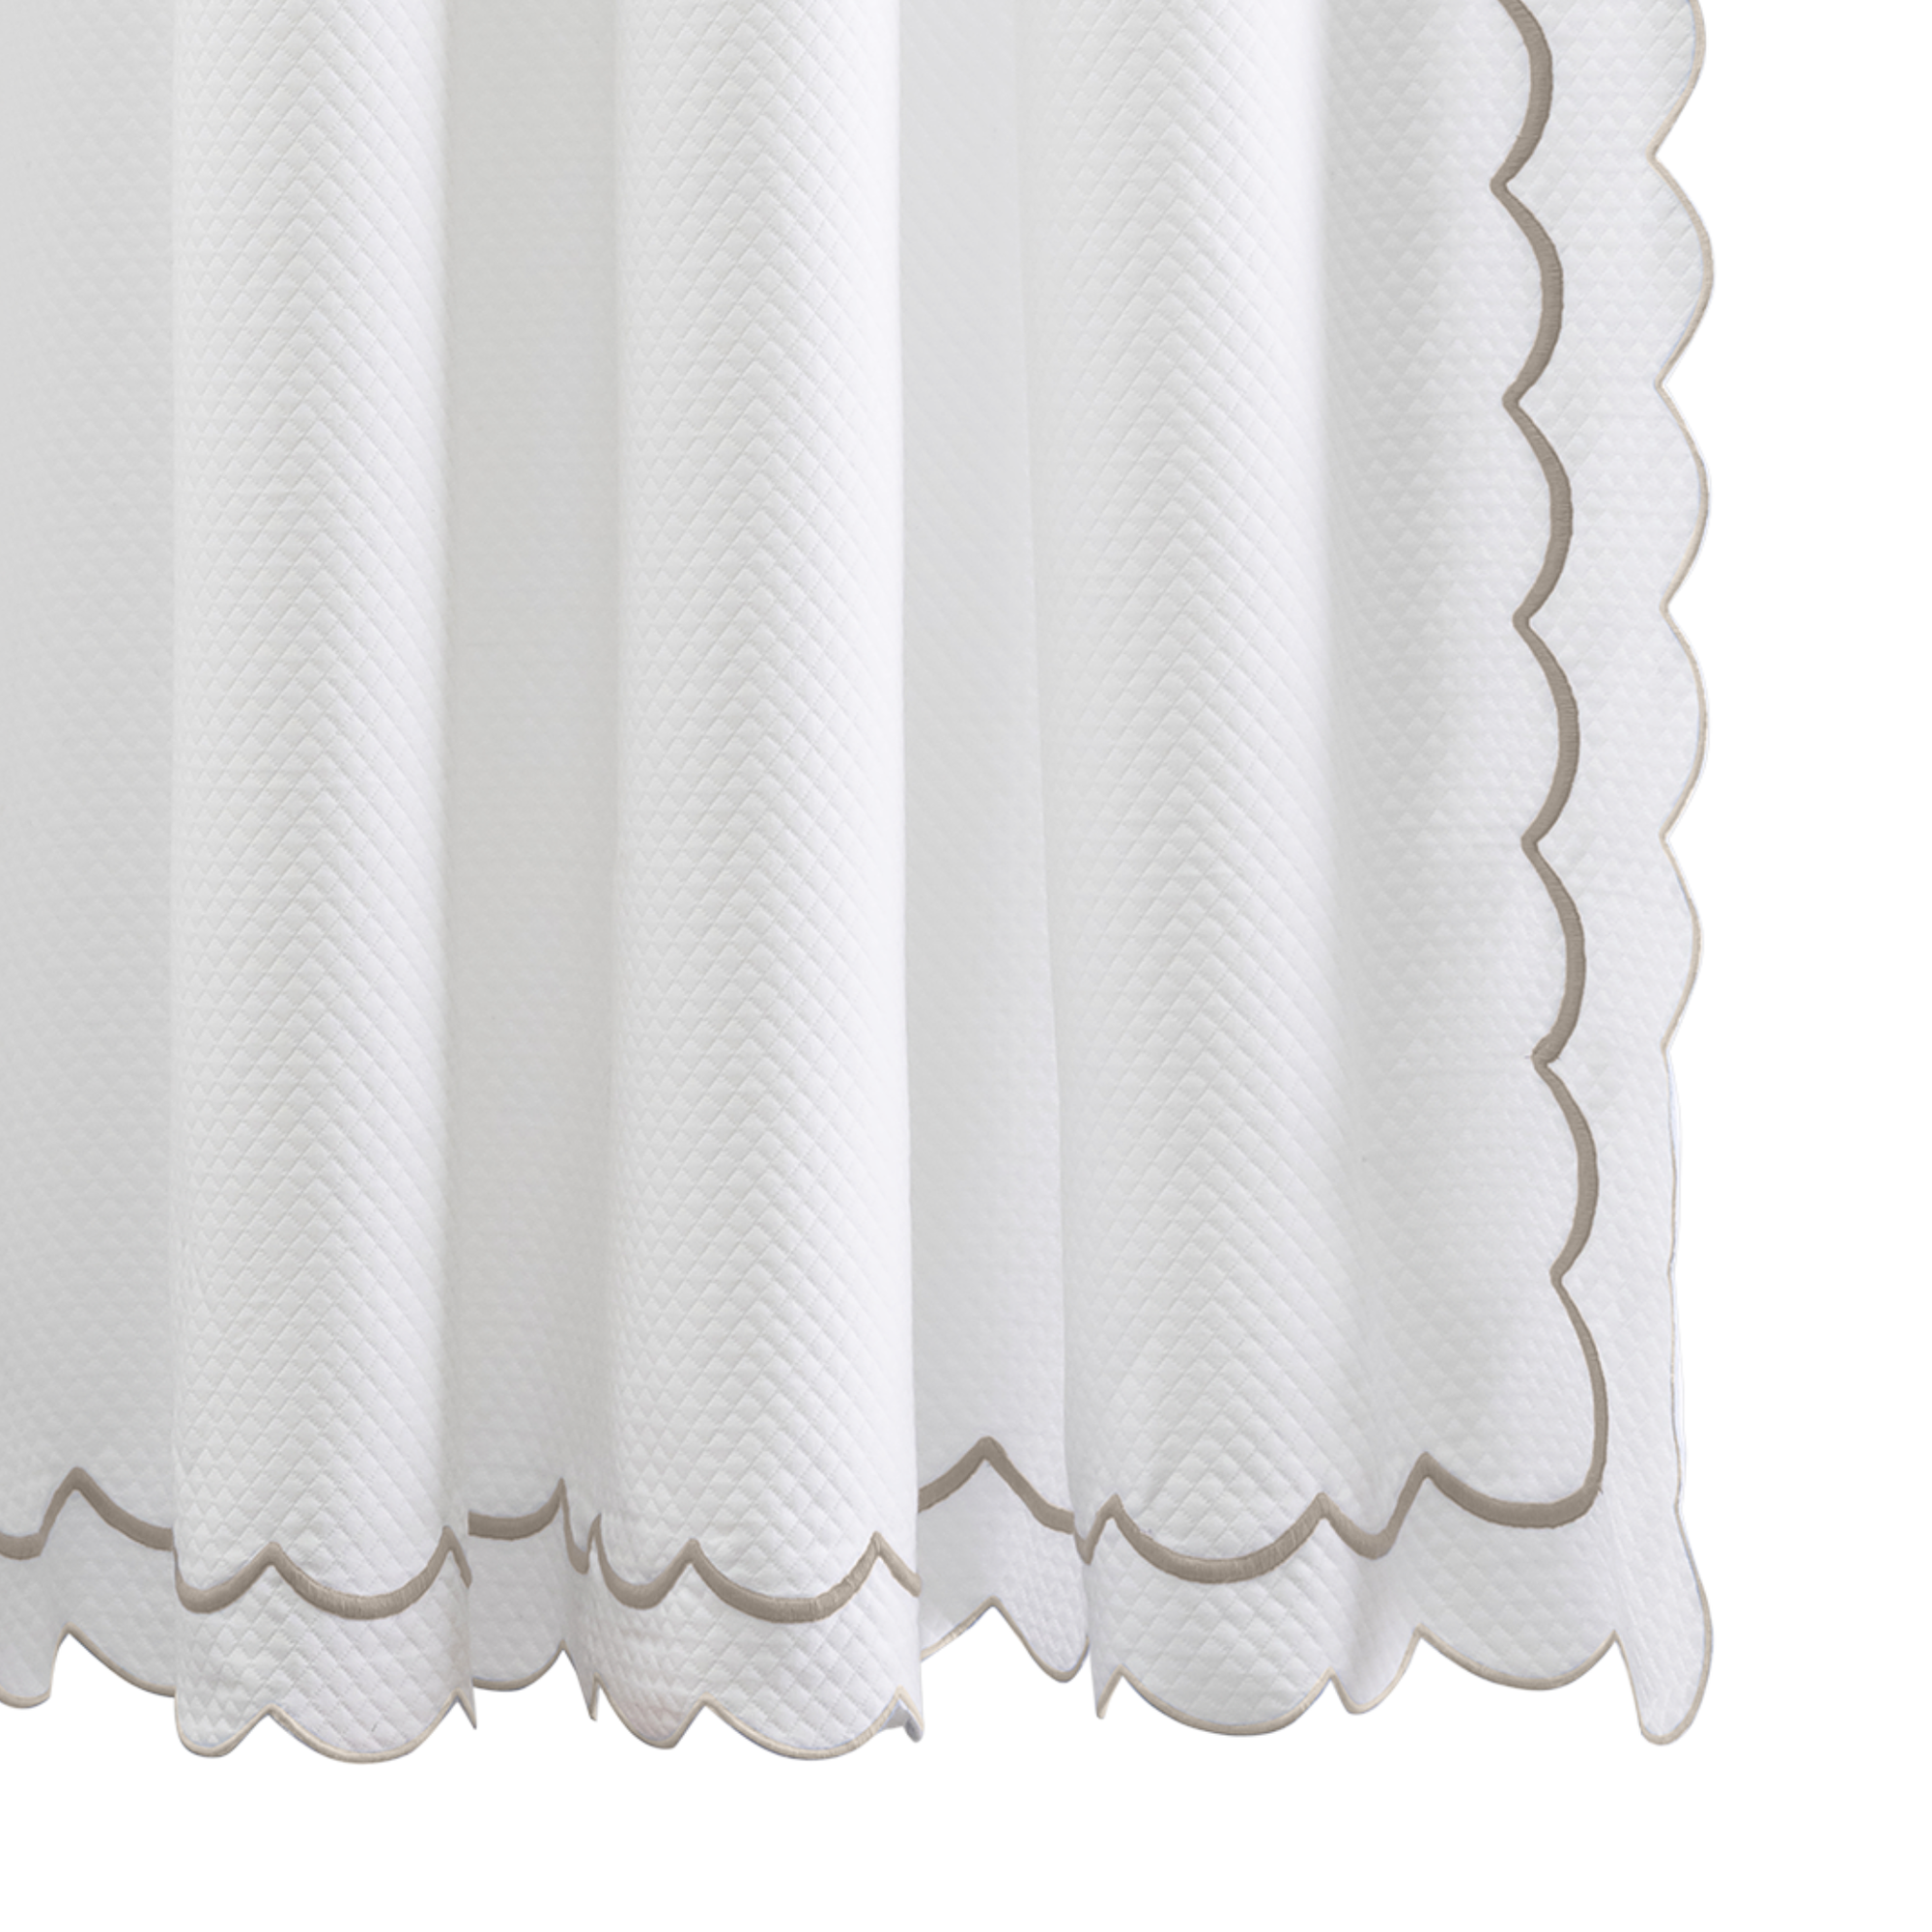 Hanging Edges of Matouk Indie Pique Shower Curtain in Driftwood Color